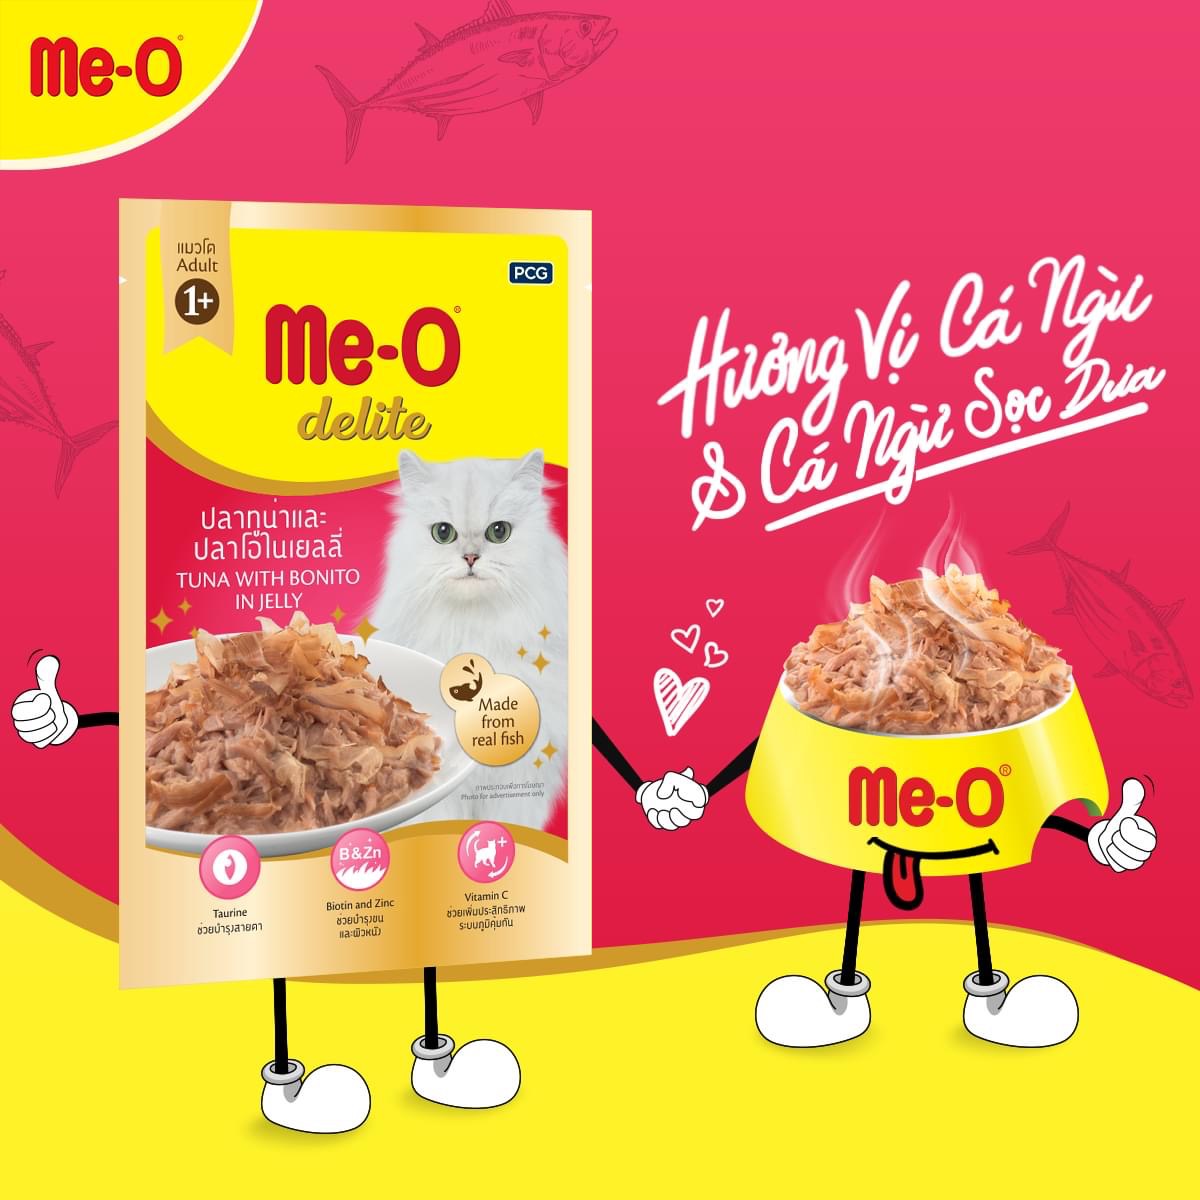 Pate Me-O Delite Tuna with Bonito in Jelly [Cá Ngừ & Cá Ngừ Sọc Dưa] 70g